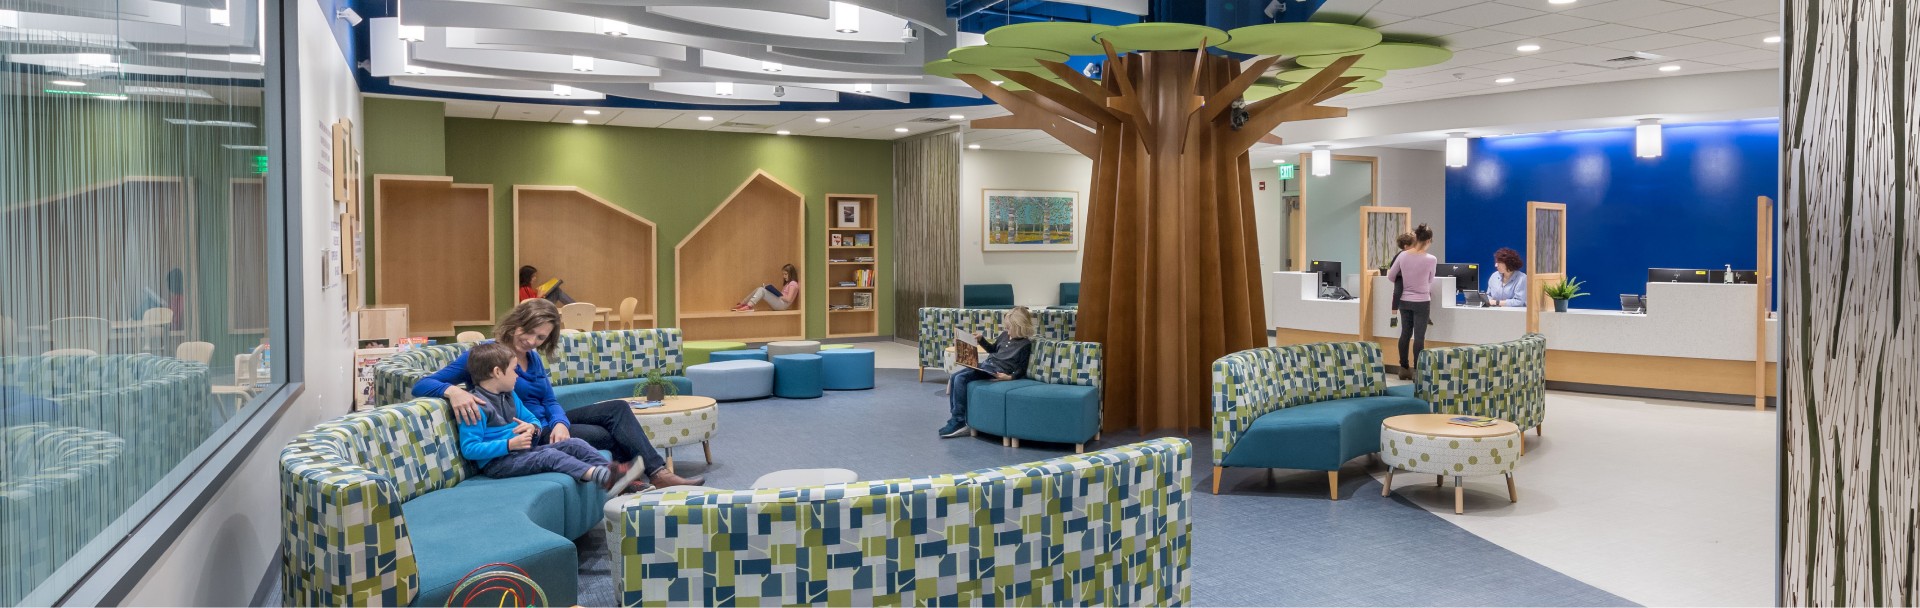 Yale Child Study Center Featured in NAIOP's New & Noteworthy Projects